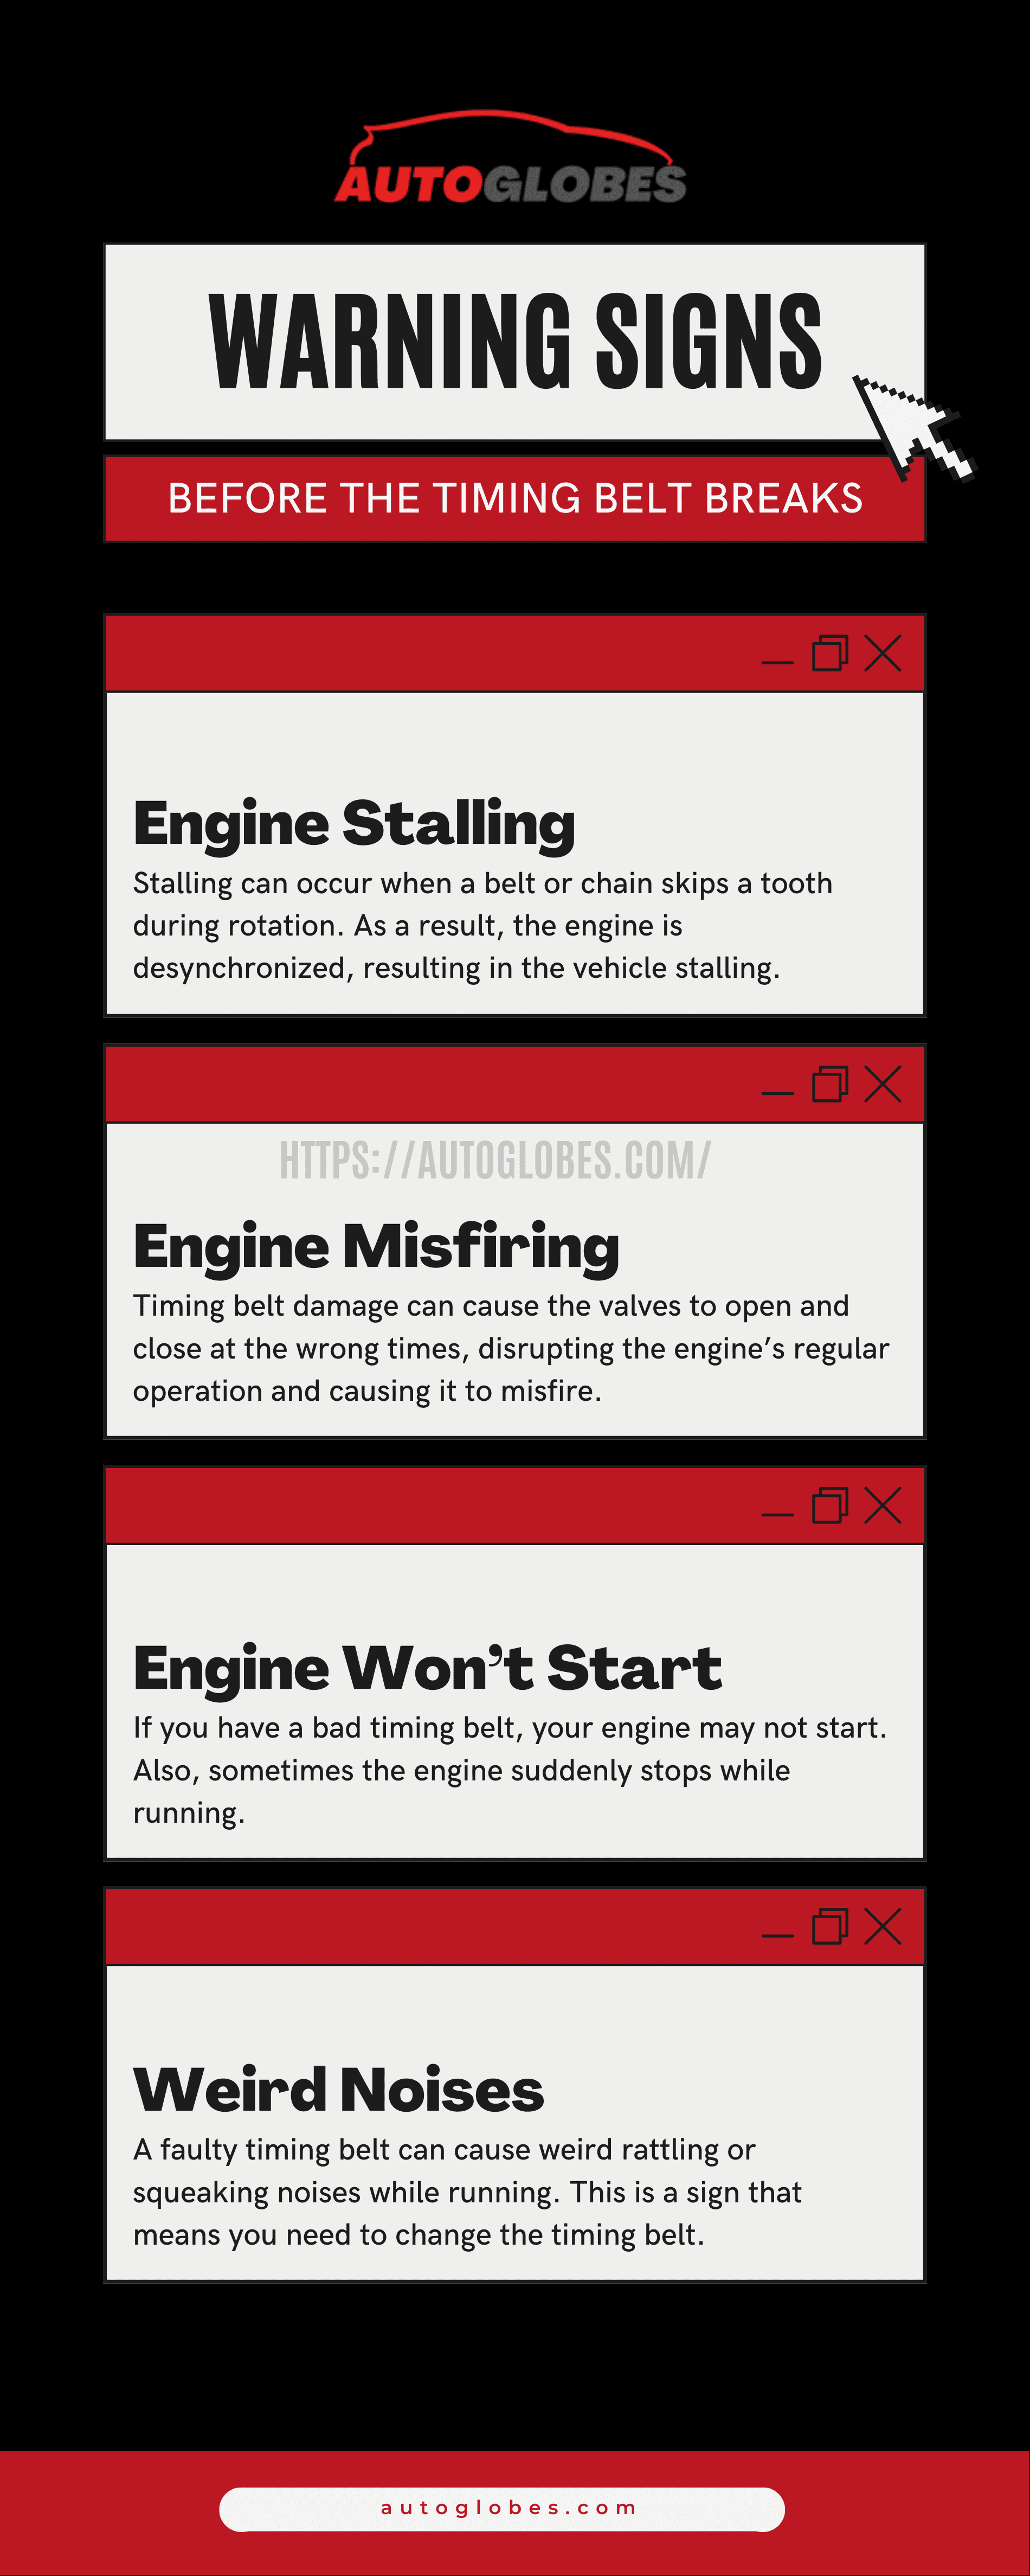 3 warning signs before the timing belt breaks Infographic